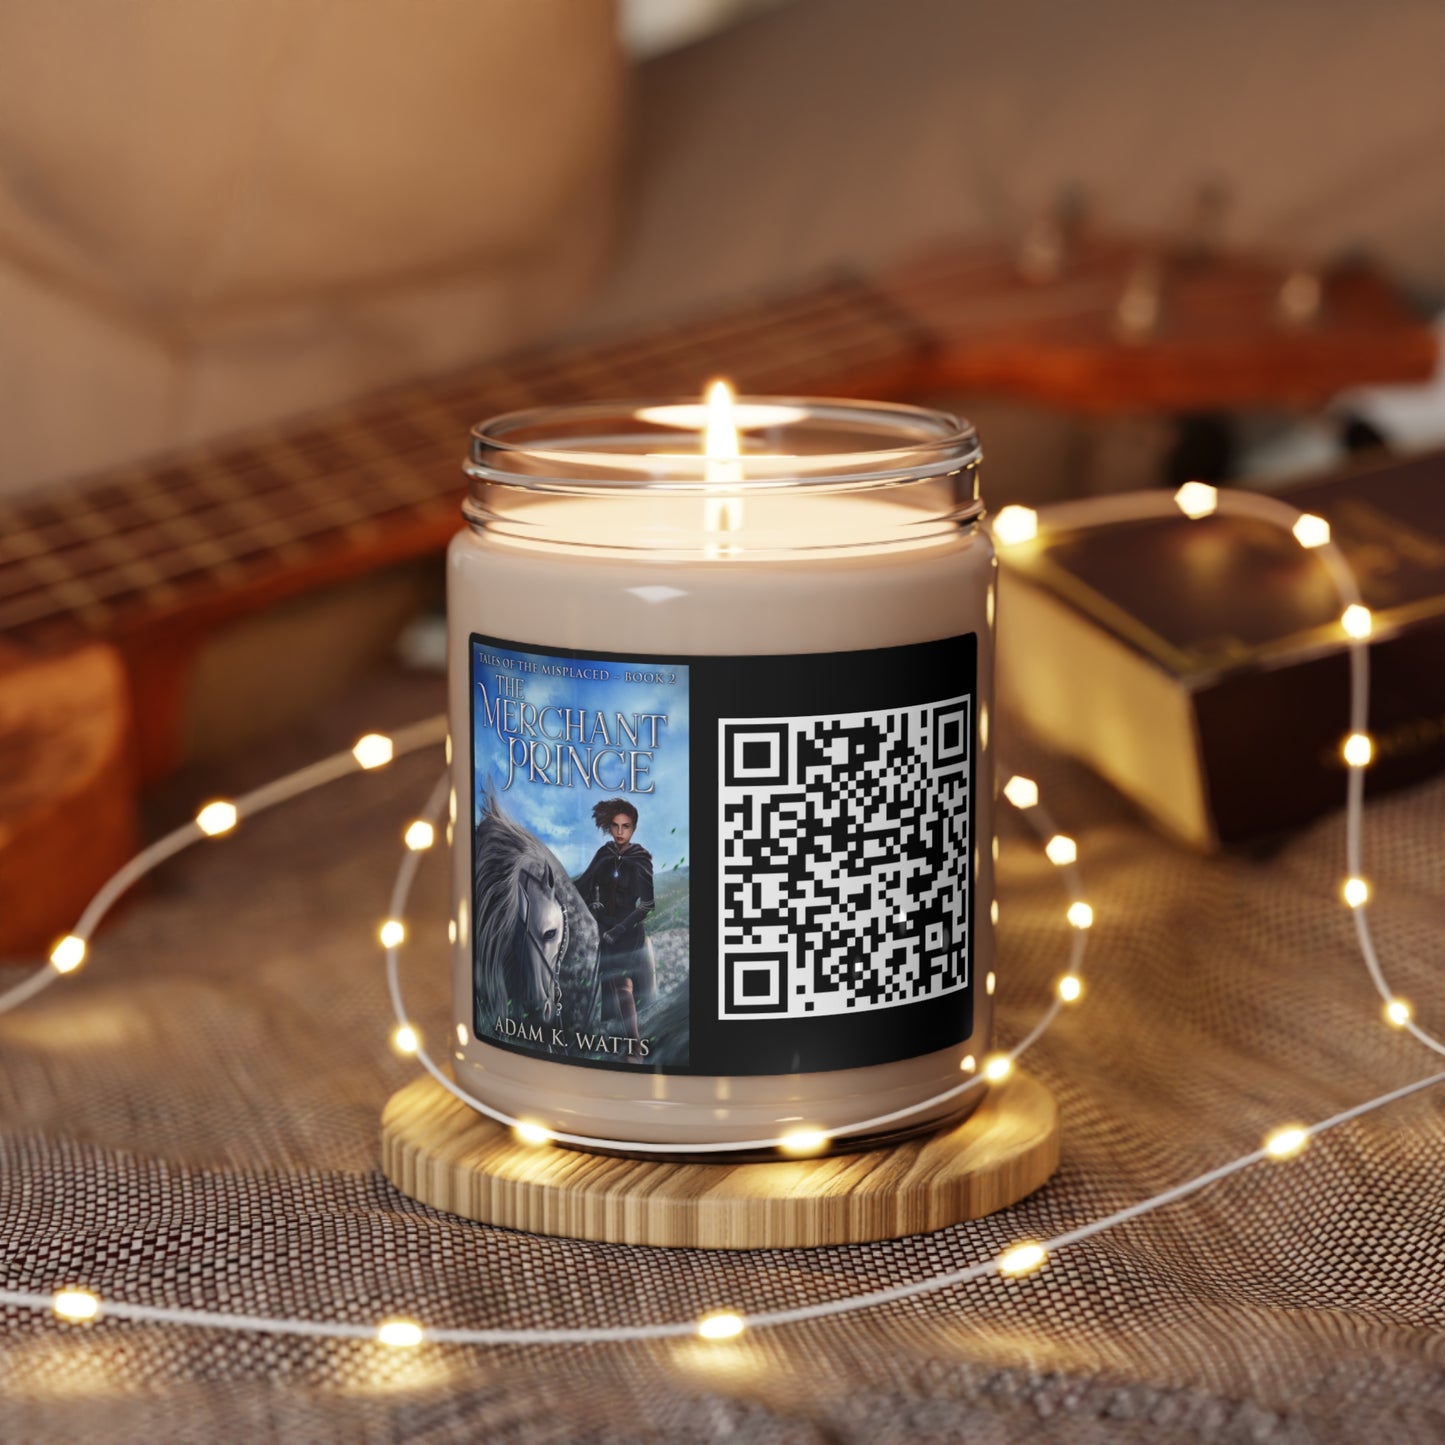 The Merchant Prince - Scented Soy Candle